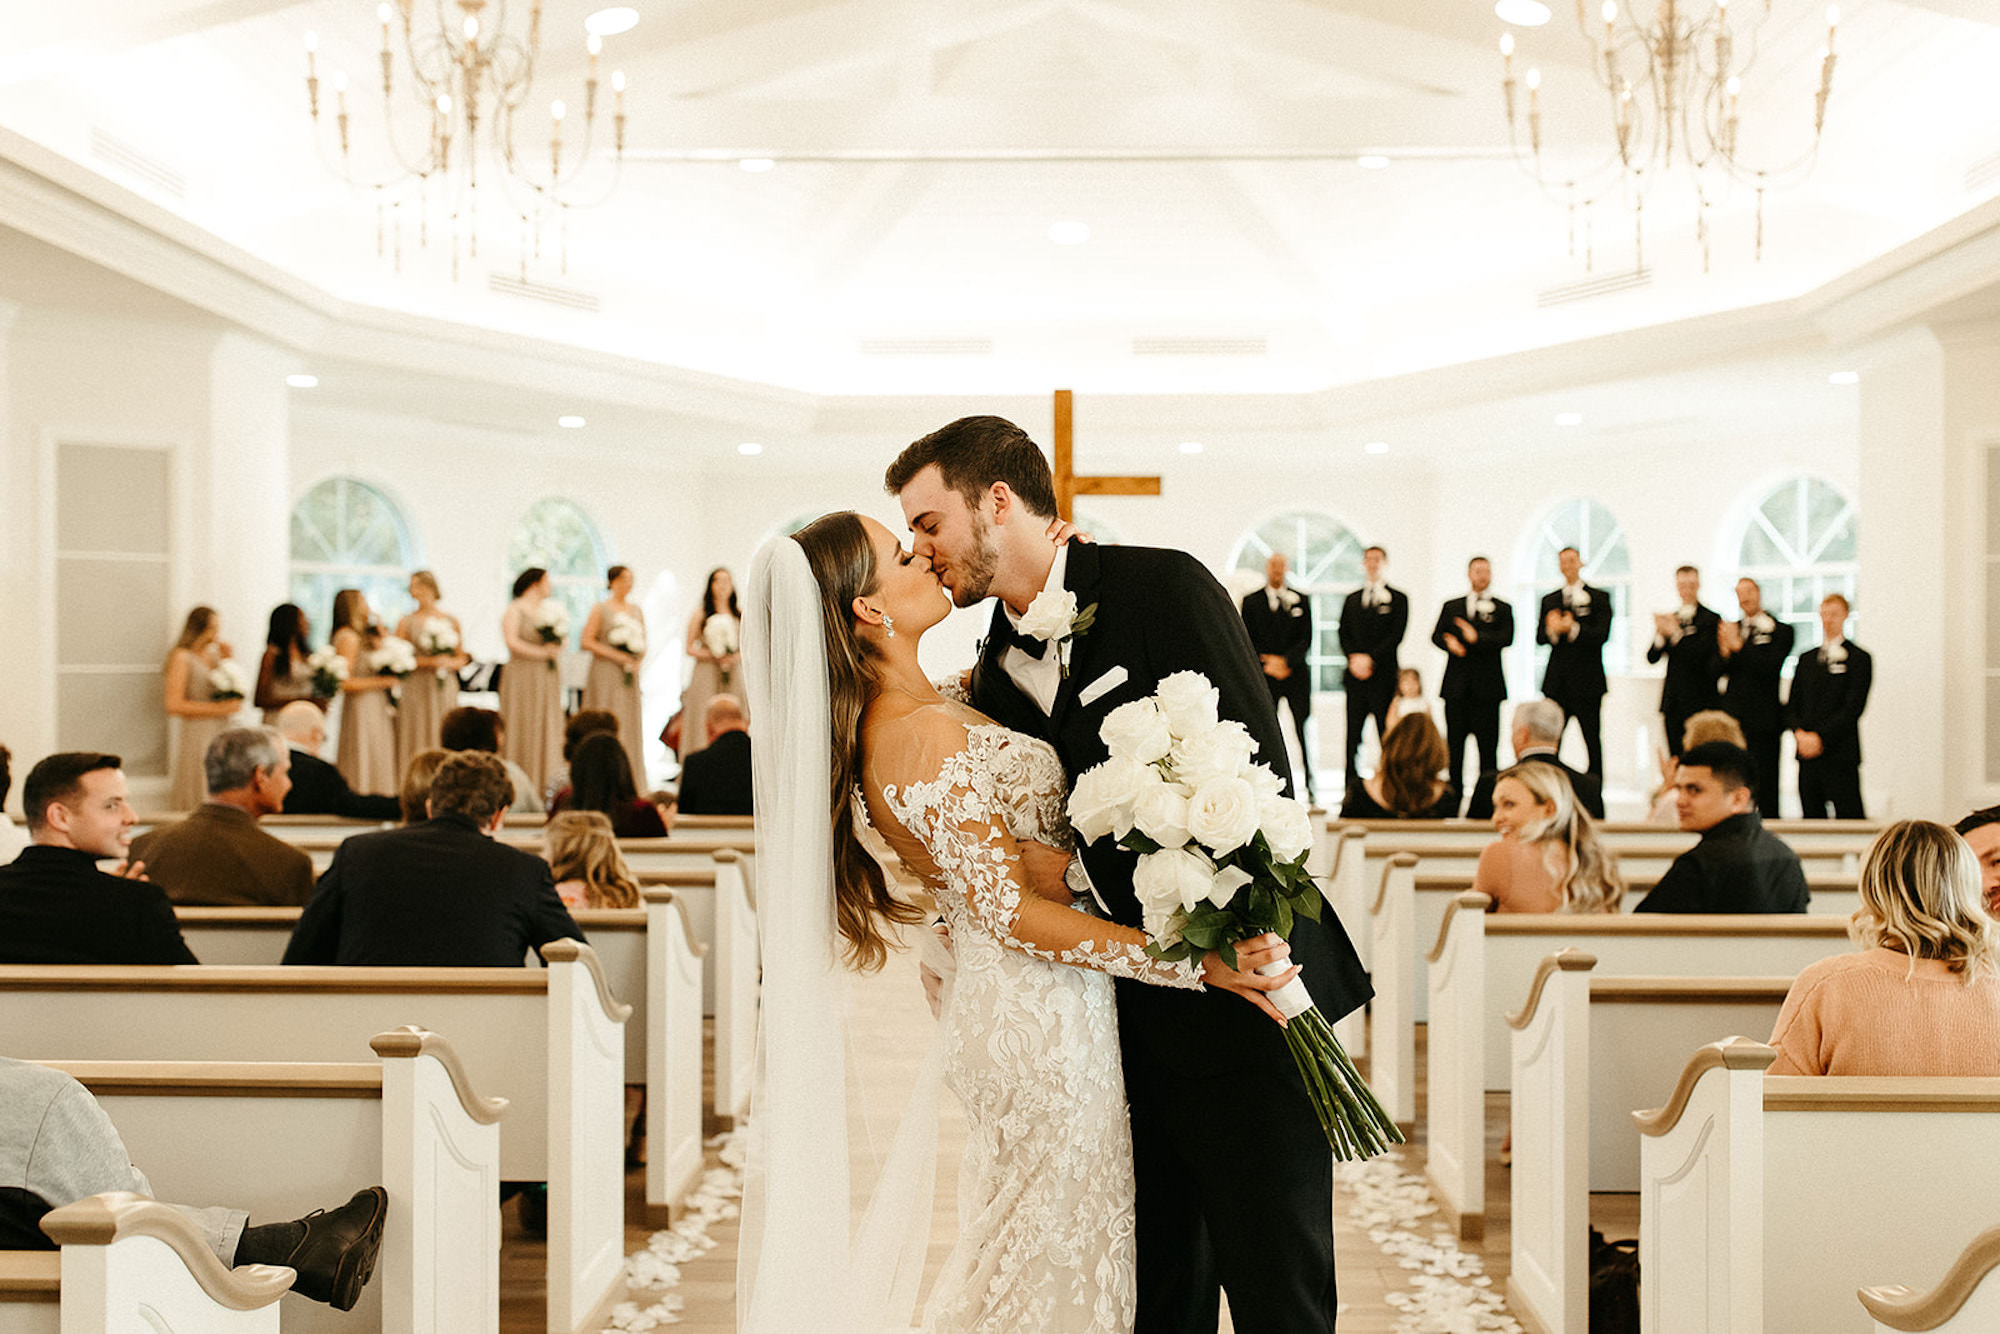 Bride and Groom First Kiss in Timeless Neutral White and Black St. Petersburg Chapel Wedding Ceremony | Harborside Chapel